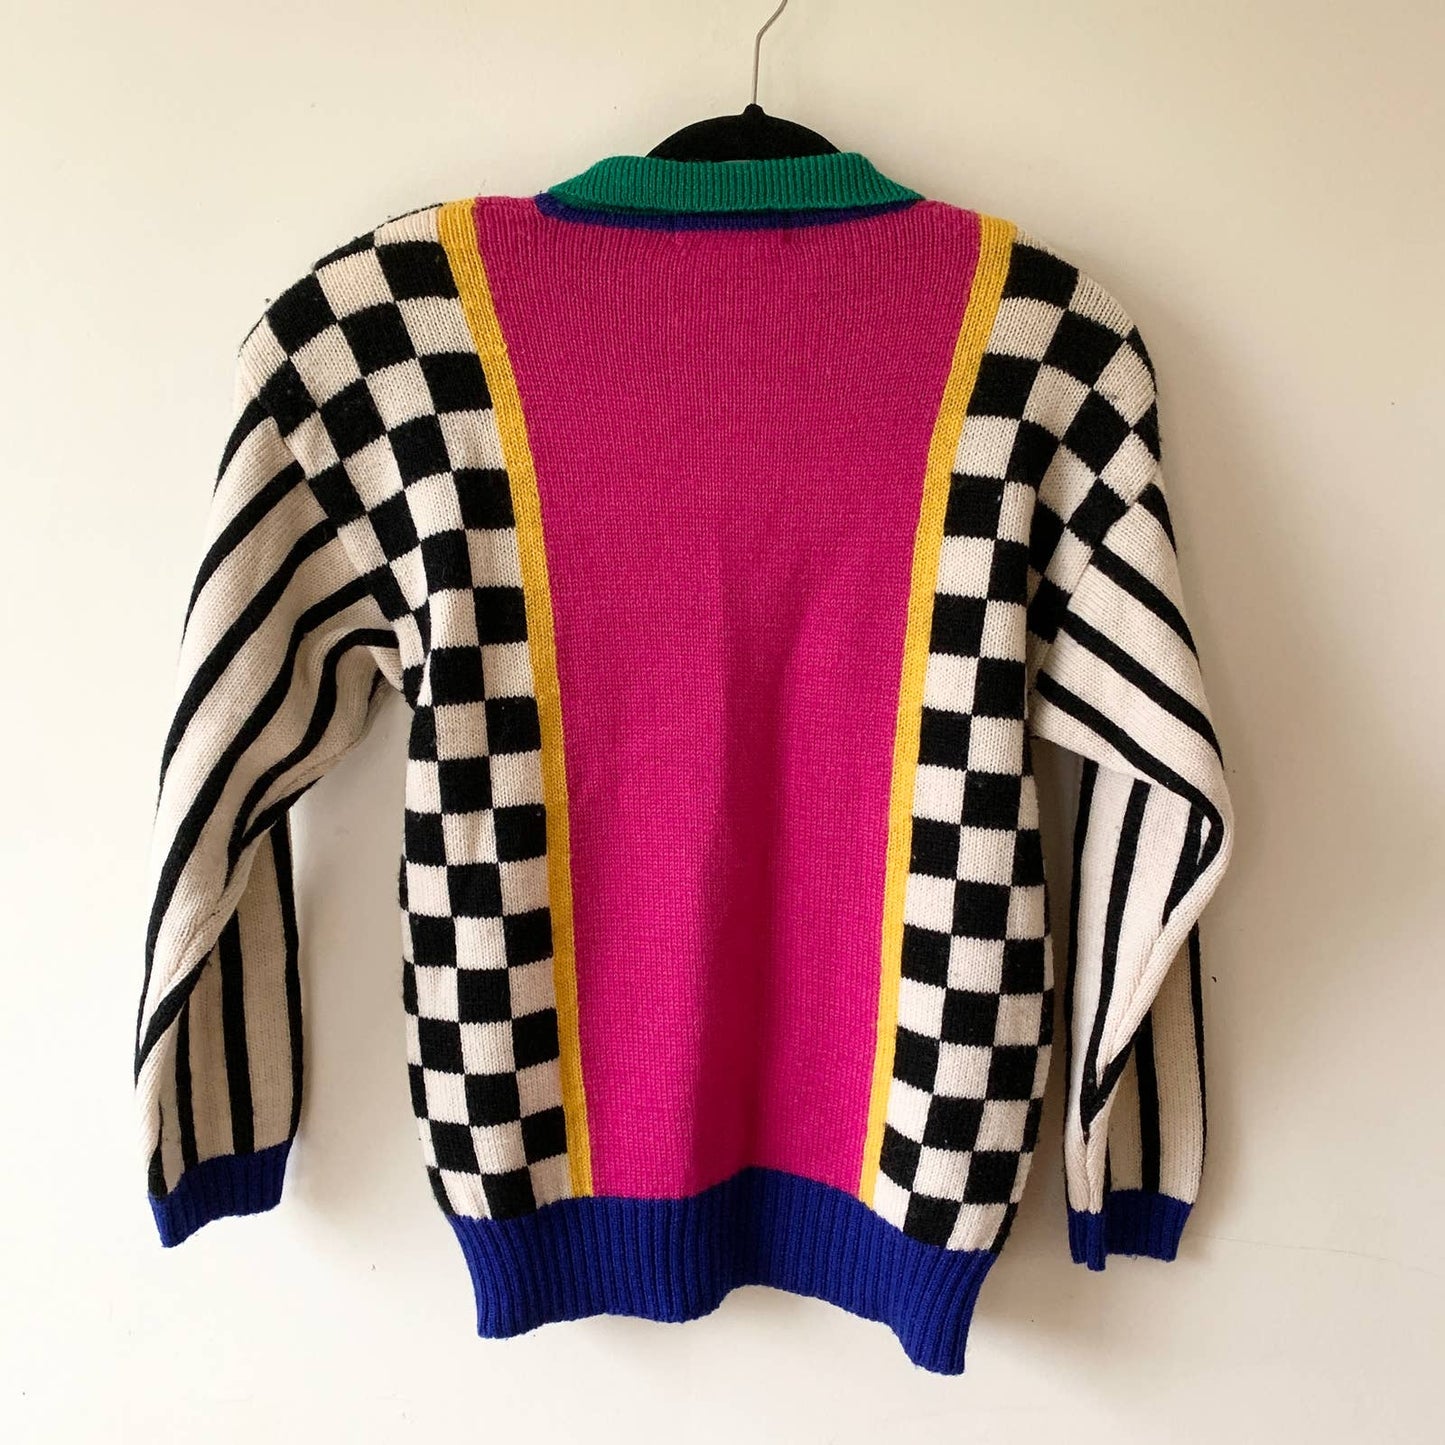 Vintage 1980s Outlander Checkered Striped Collared Pink Blue Black Sweater large